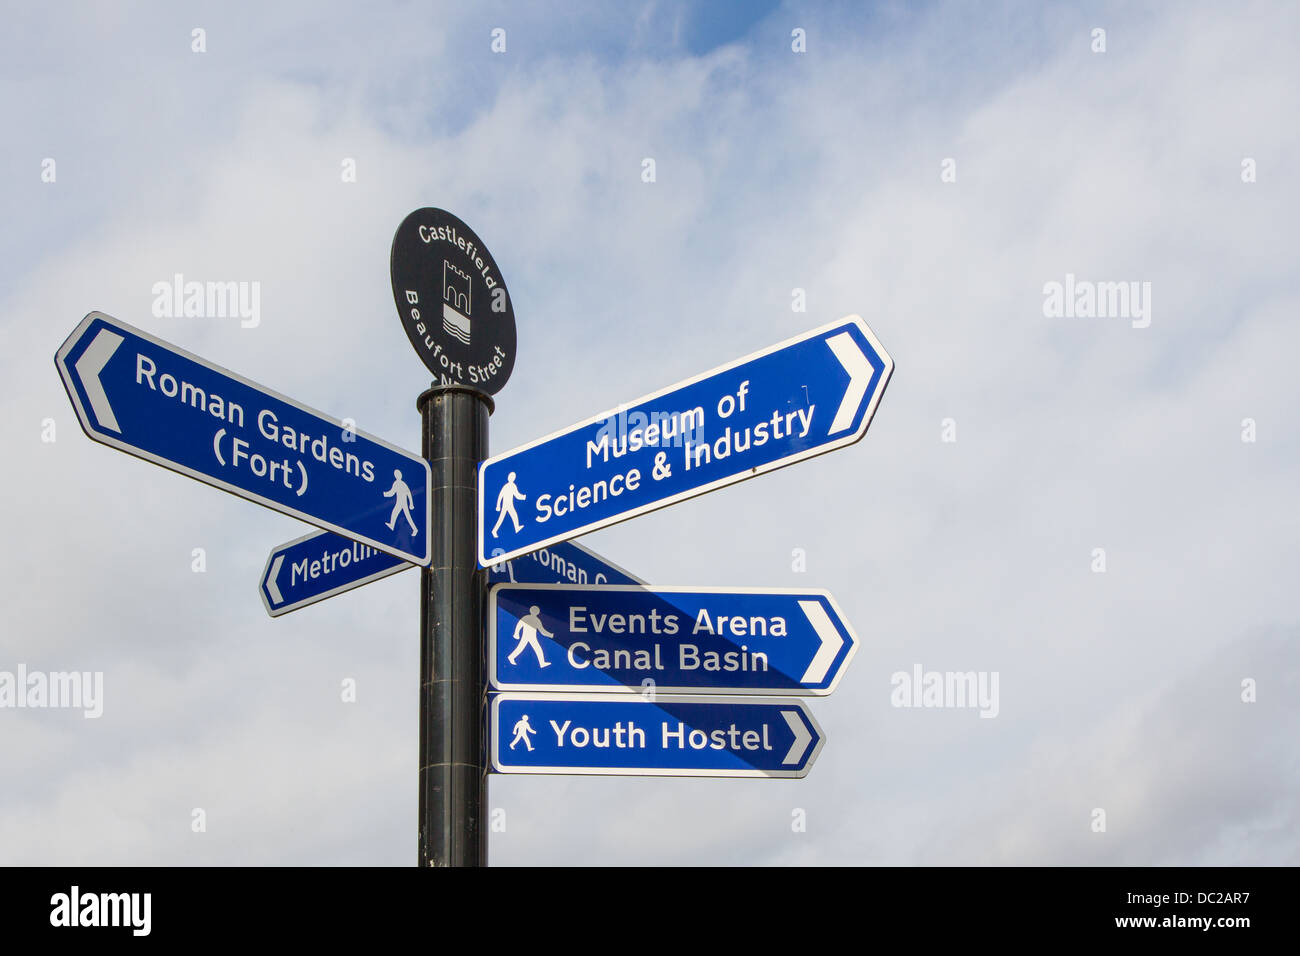 Directional wayfinding sign in Castlefield, Manchester. Stock Photo